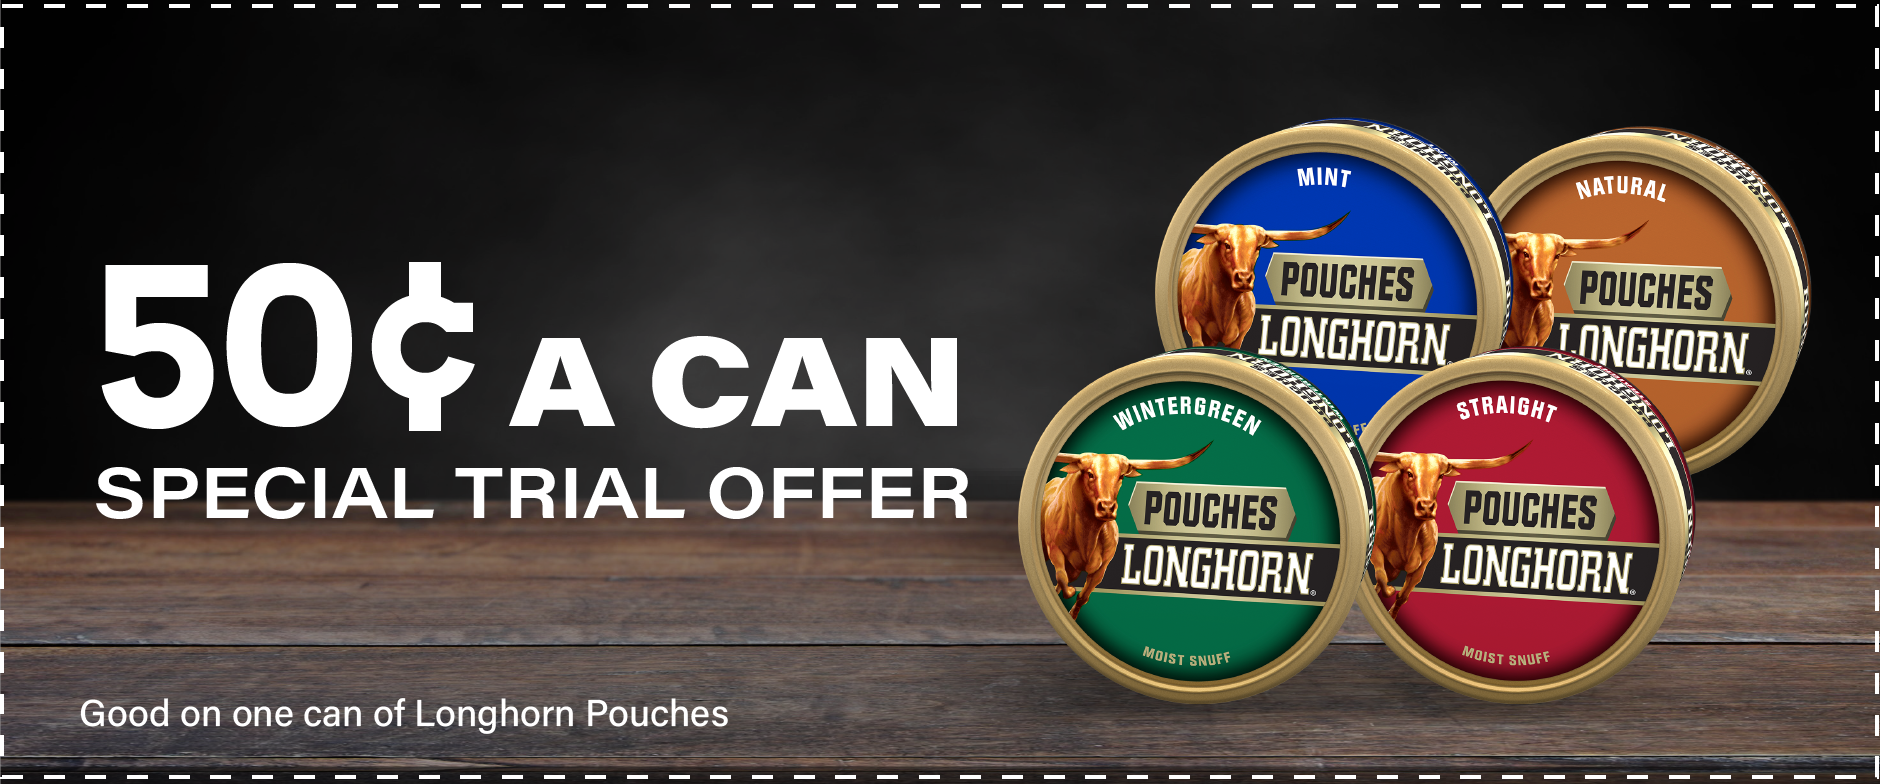 A coupon offer to try a can of Longhorn moist snuff pouches for fifty cents. On the left of the coupon is an arrangement of cans of Longhorn pouches.